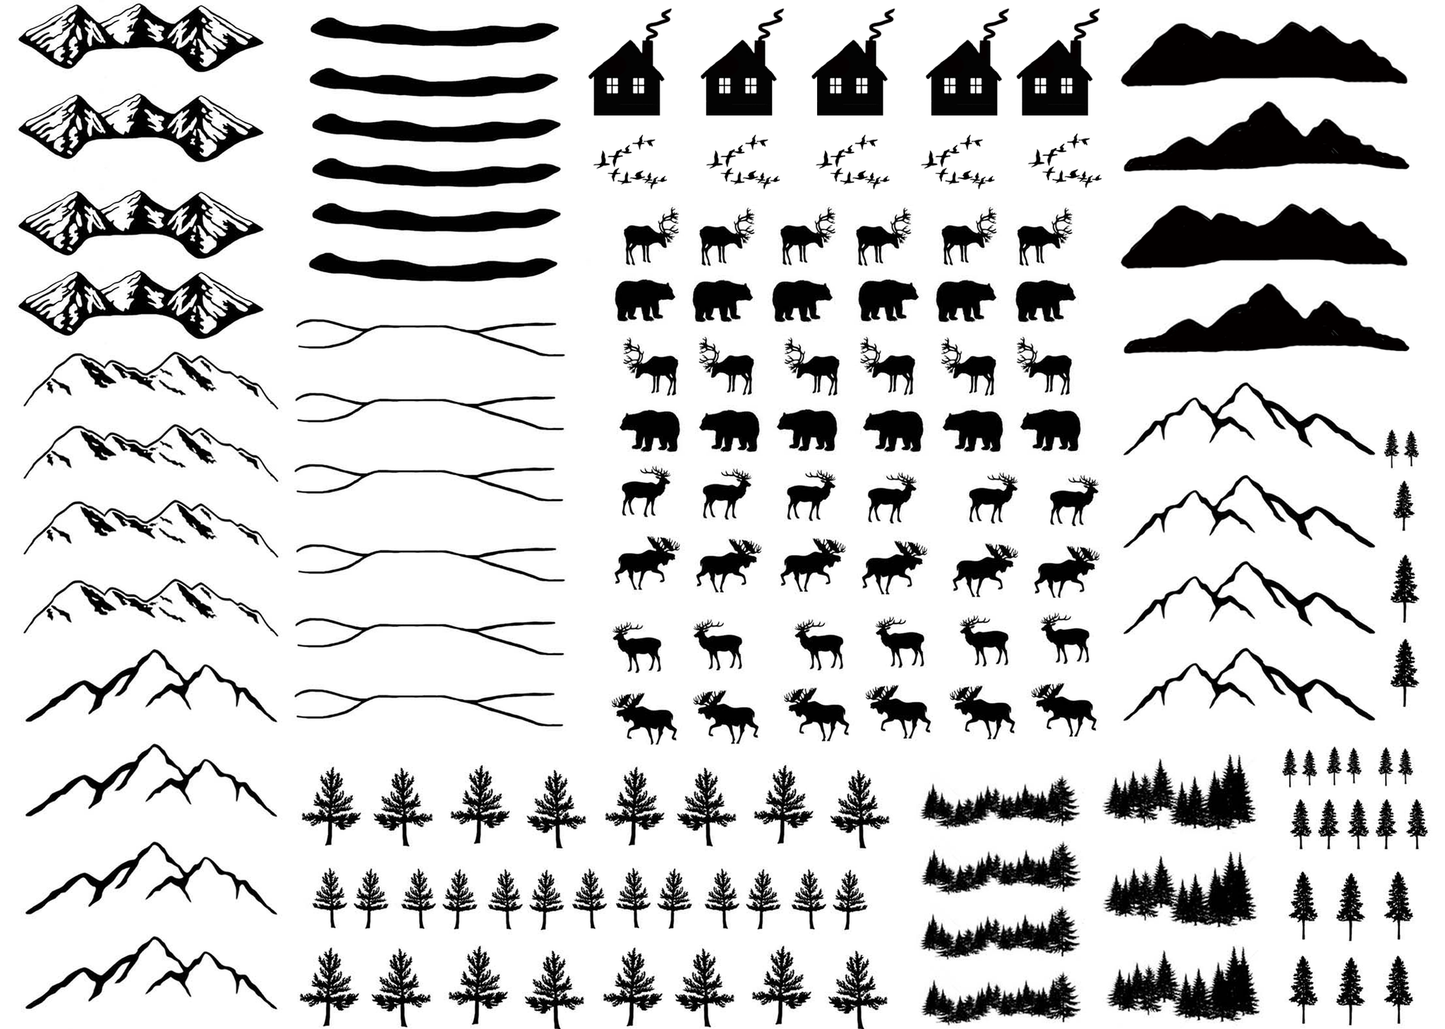 Mountain Scenery 148 pcs 1/4" to 1-1/2" Black Fused Glass Decals